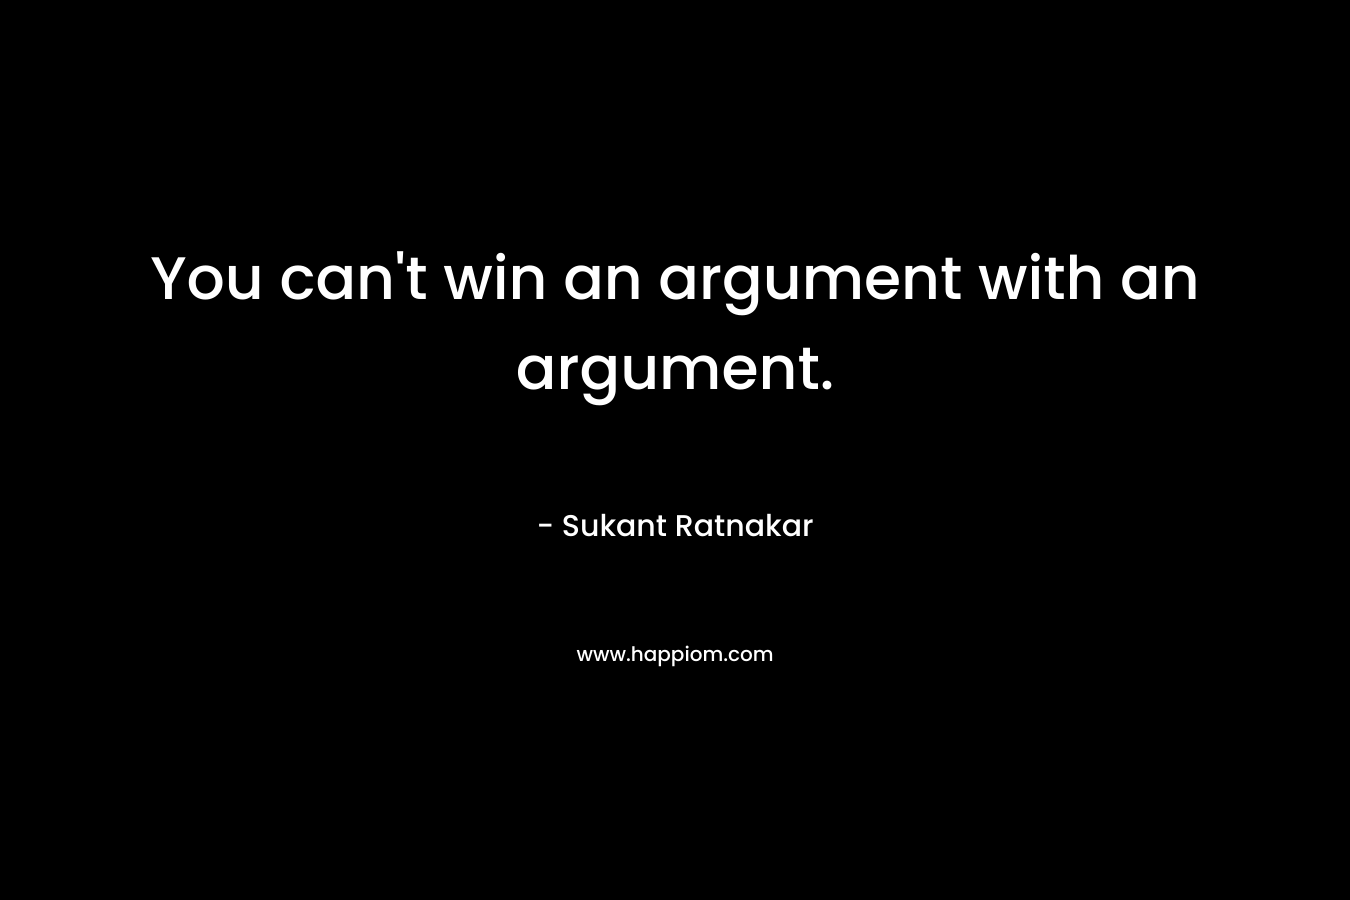 You can’t win an argument with an argument. – Sukant Ratnakar